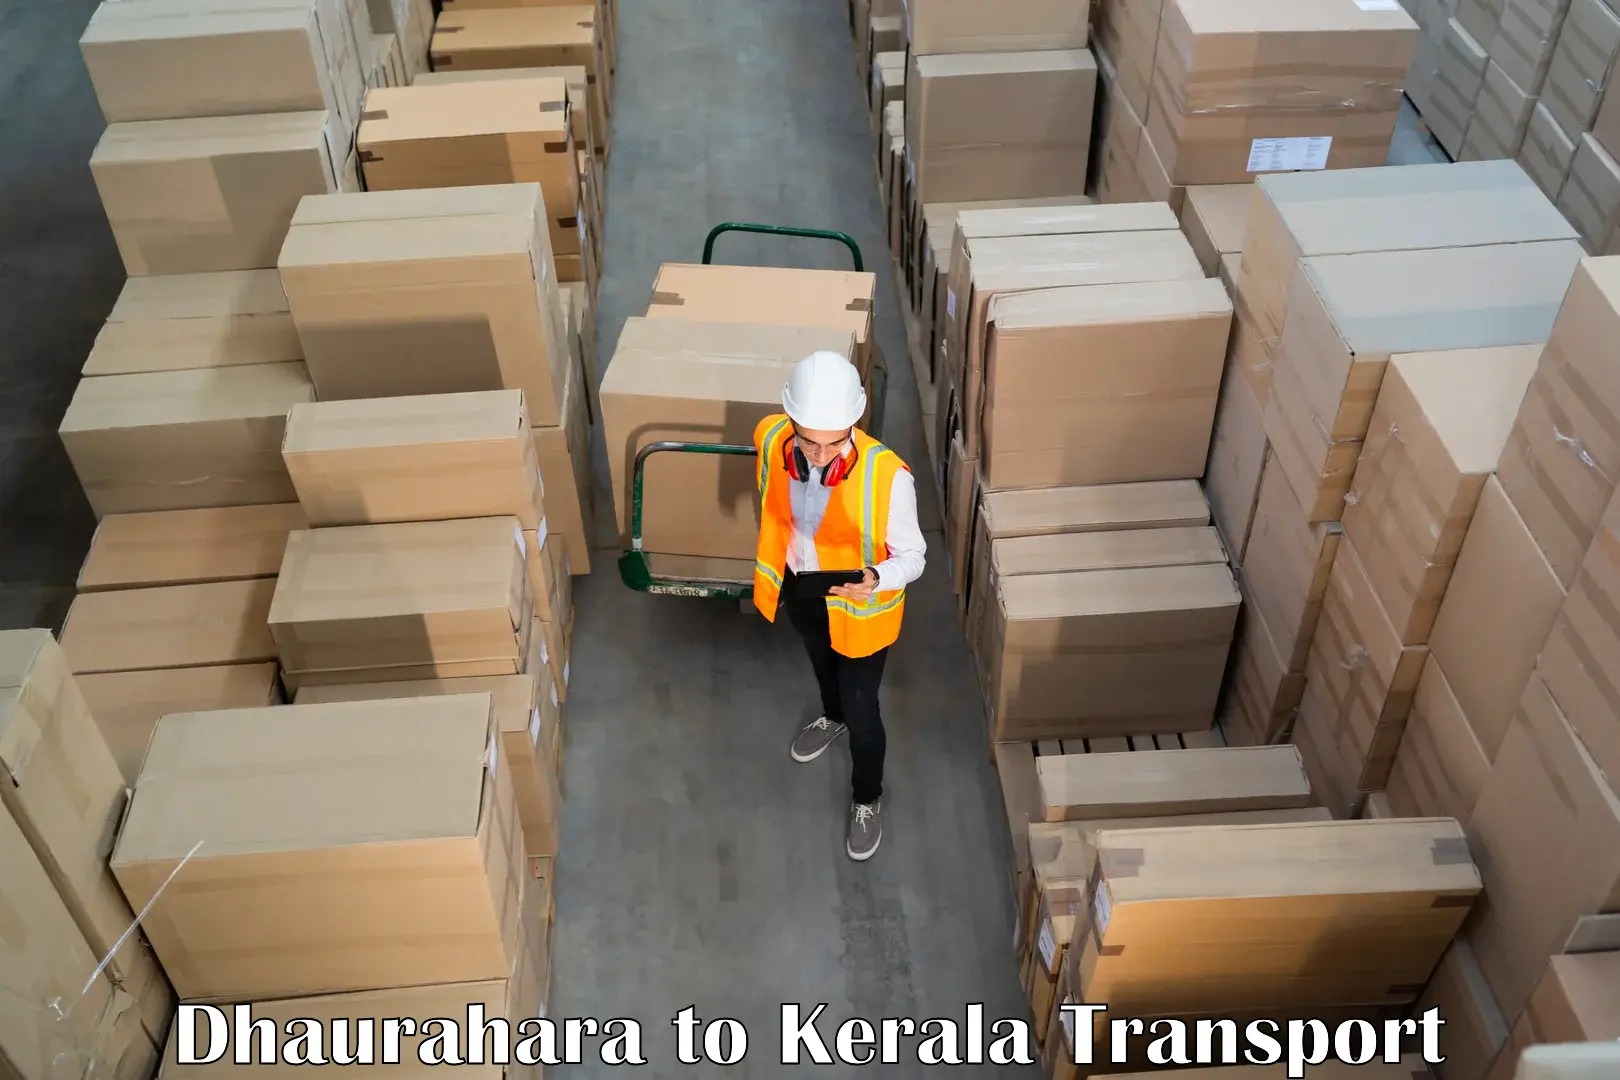 Daily parcel service transport in Dhaurahara to Koothattukulam